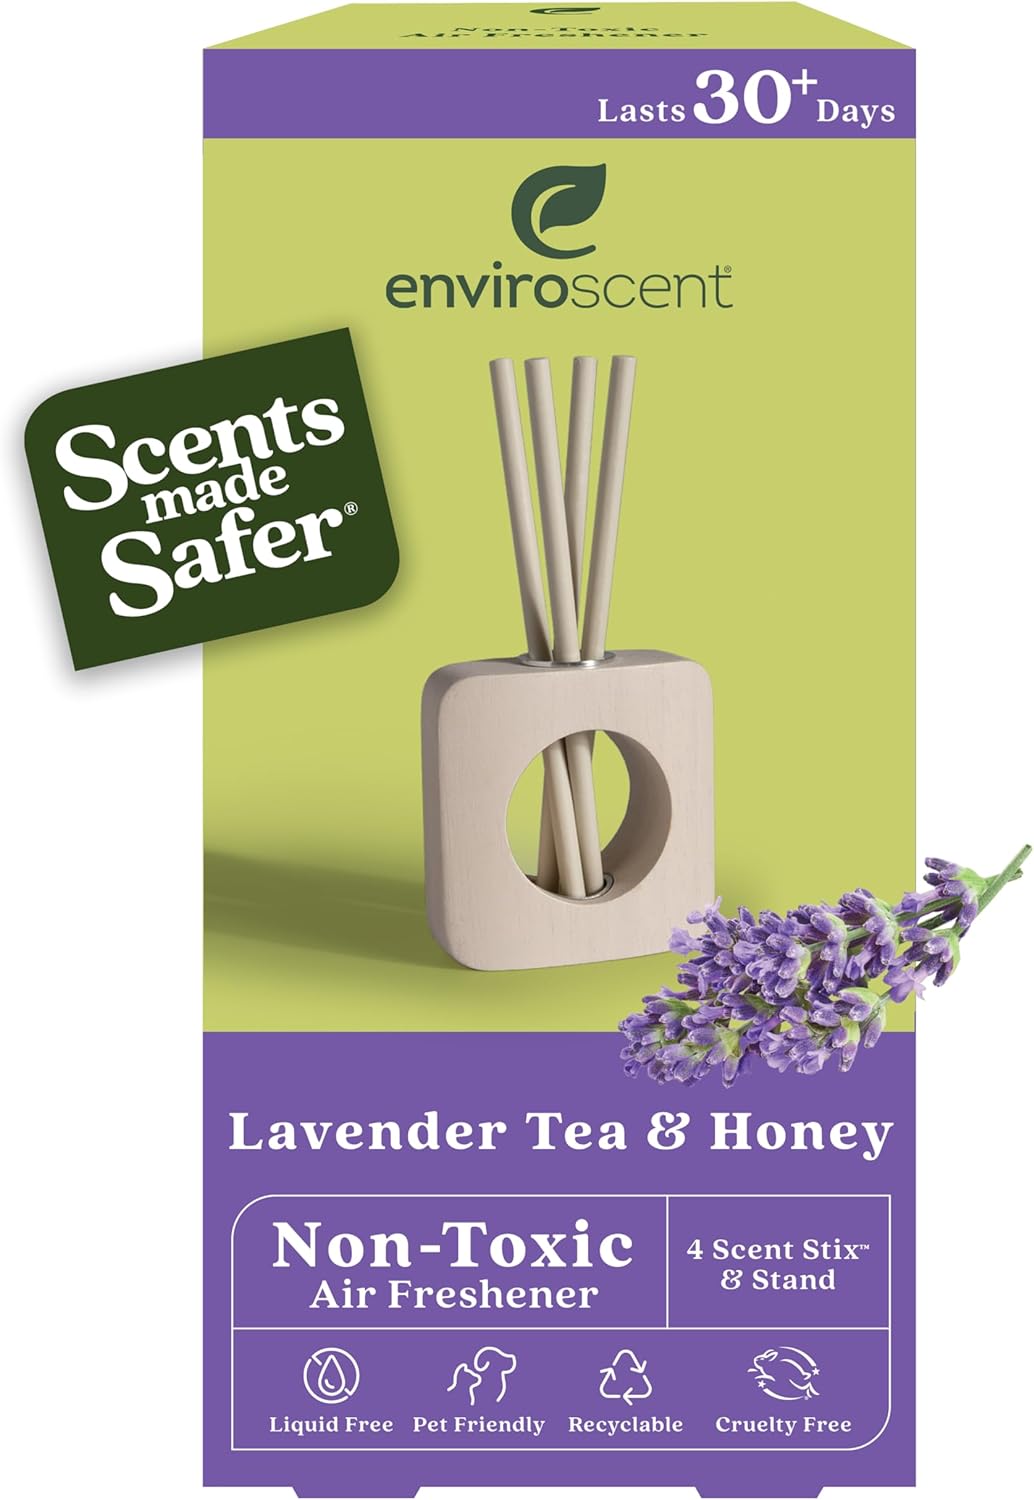 Enviroscent Non-Toxic Air Freshener for Home (Lavender Tea & Honey) Essential Oil Diffuser | Air Freshener | Home Fragrance Last Over 30 Days | 1 Mango Wood Stand & 1 Scent Stix Refill